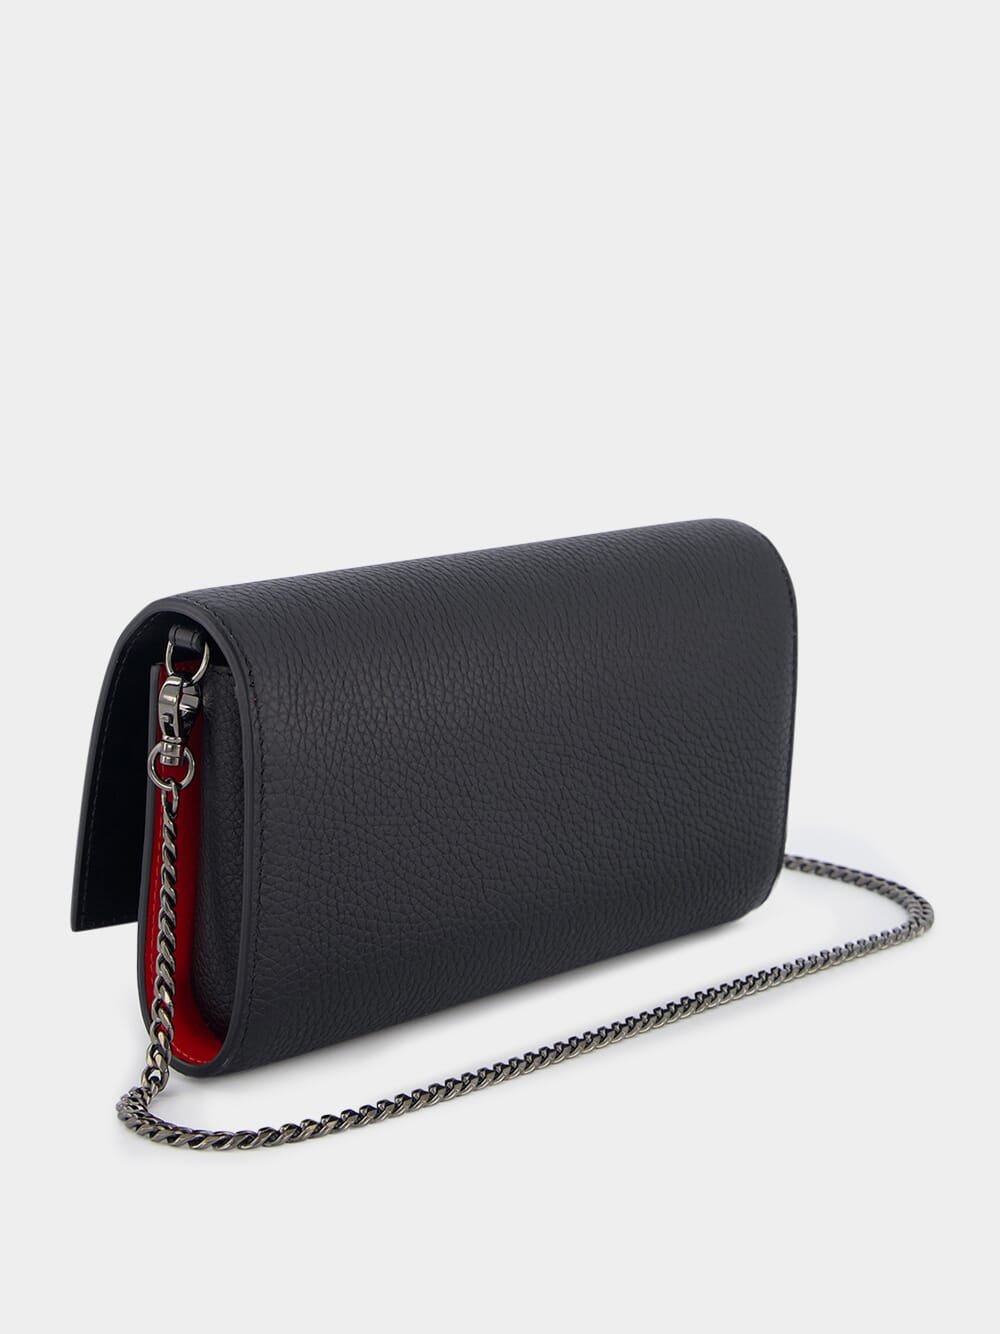 Christian LouboutinBy My Side Clutch at Fashion Clinic